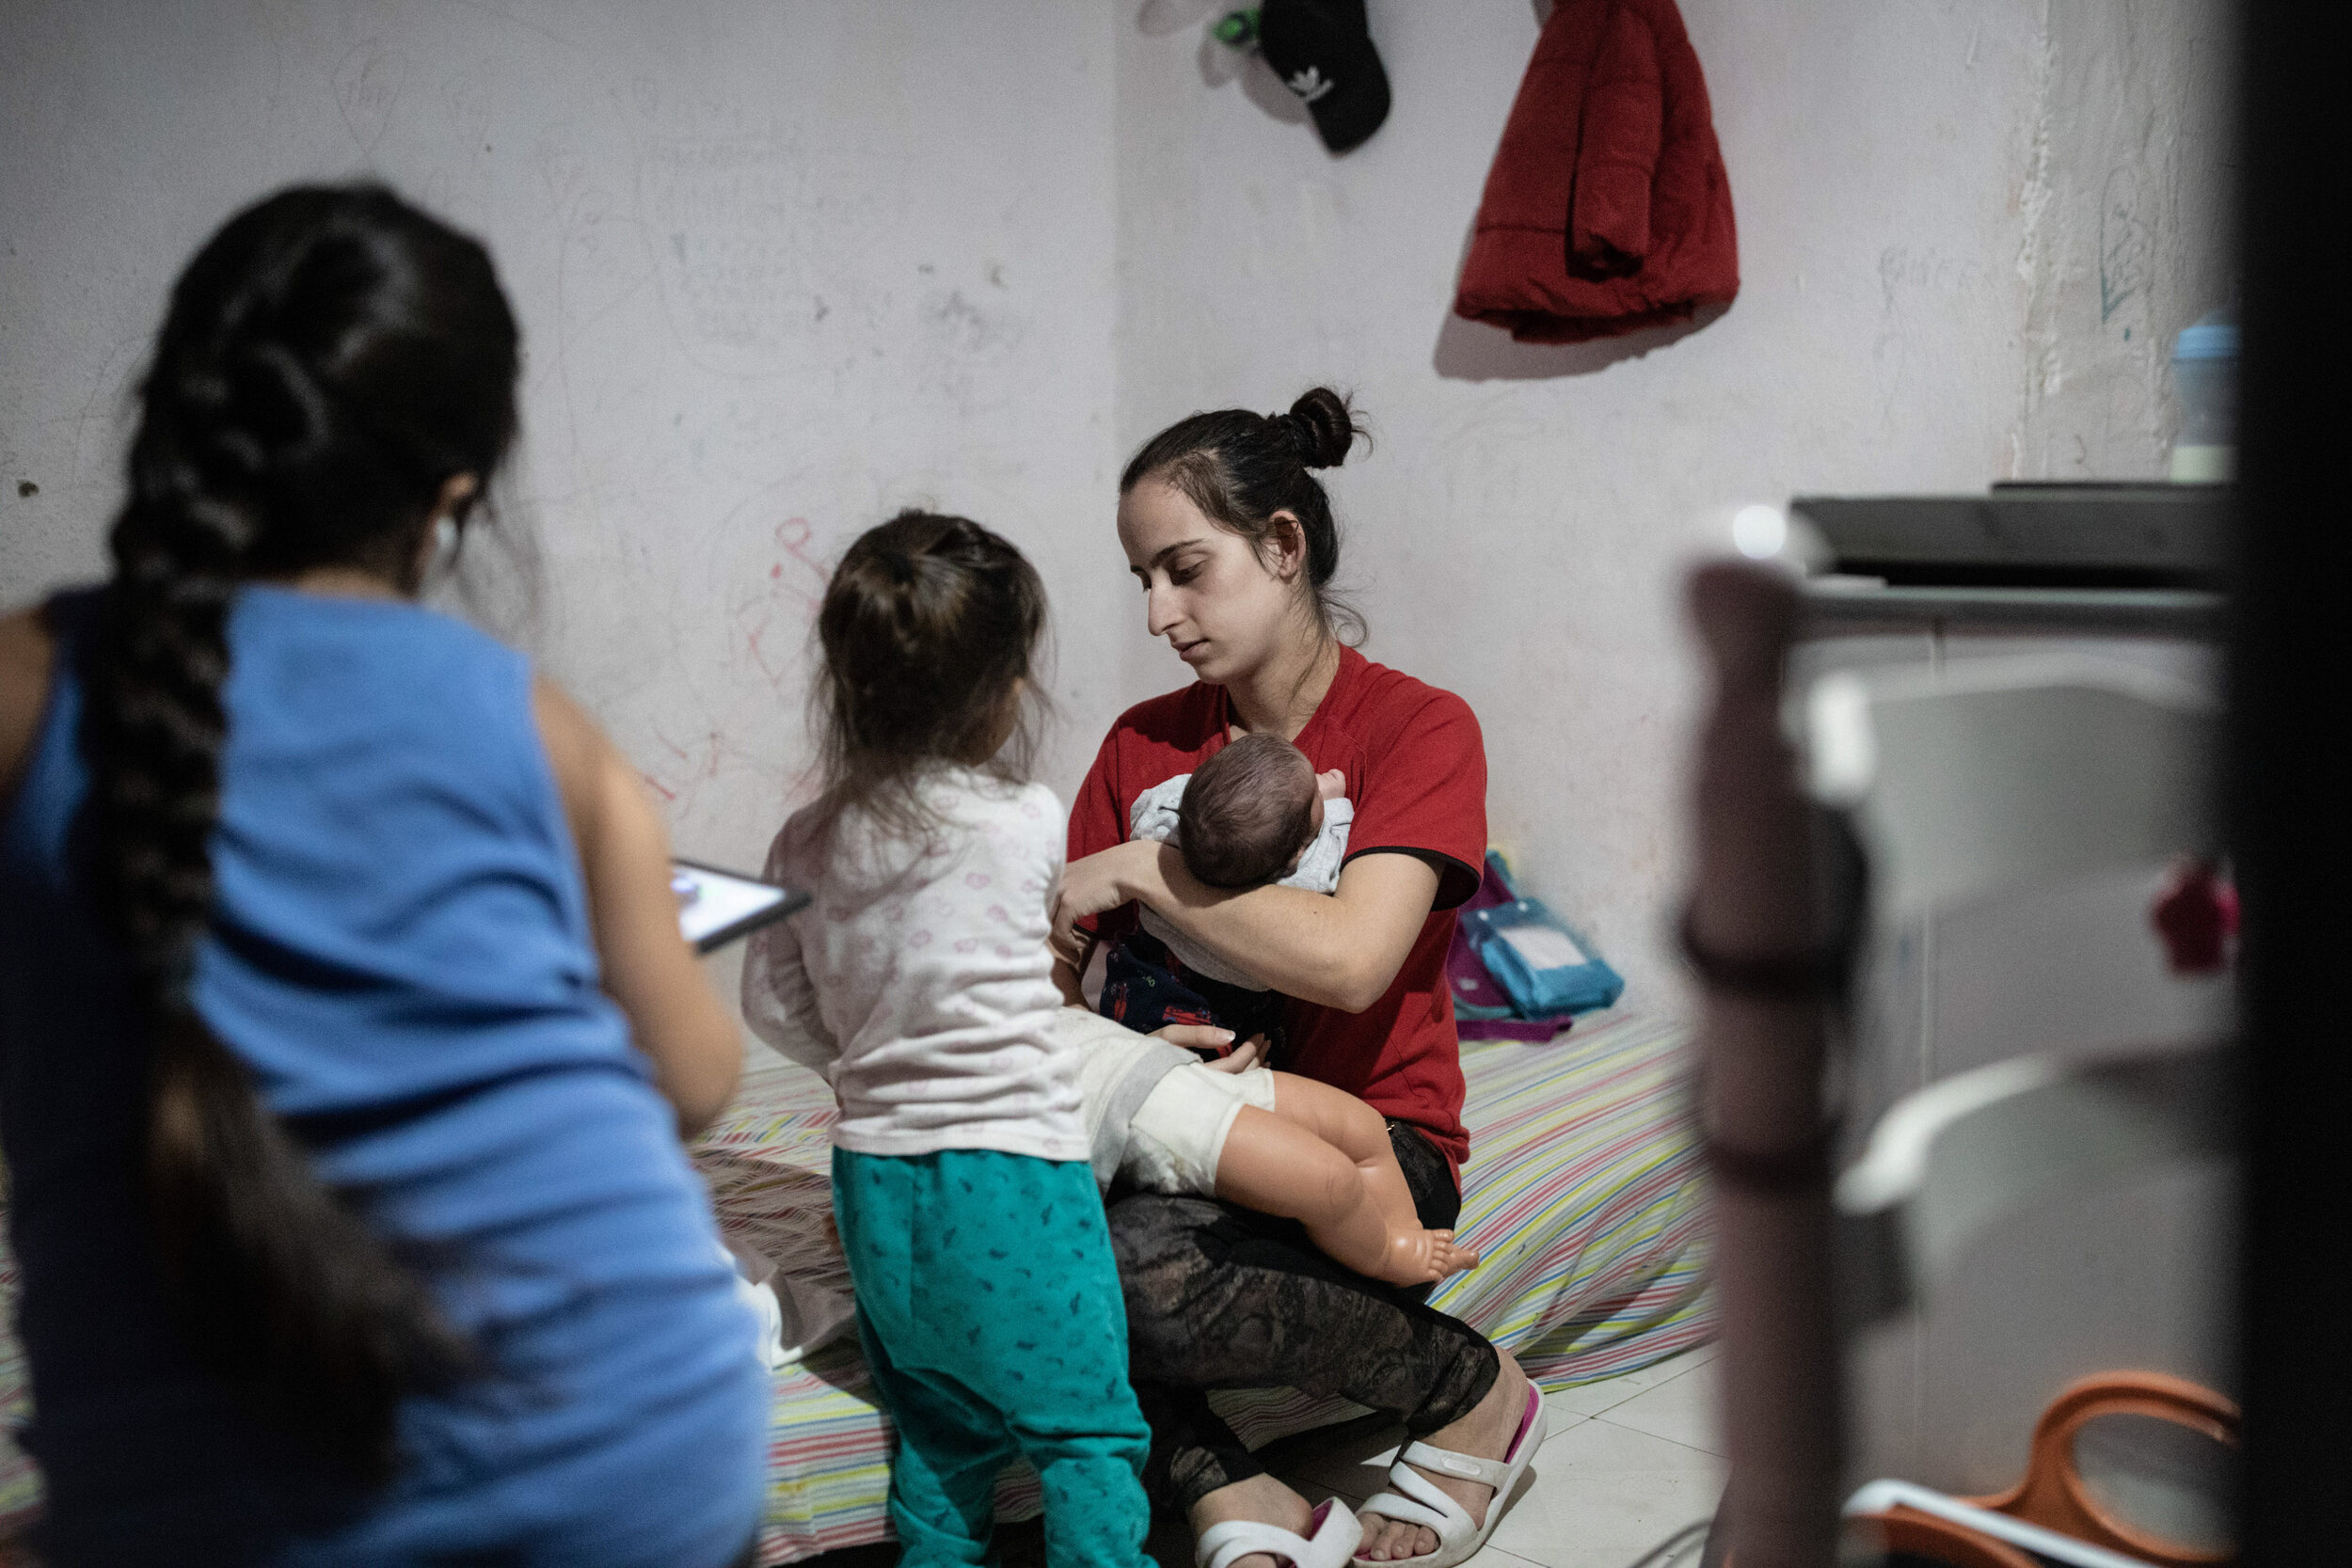  4th of March 2020   Helena's daughter in law (center) holds her newborn baby at the basement in Amadora, Lisbon the family has been living in since their home was demolished. Before coming here, Helena's family was out of choices. After the home she